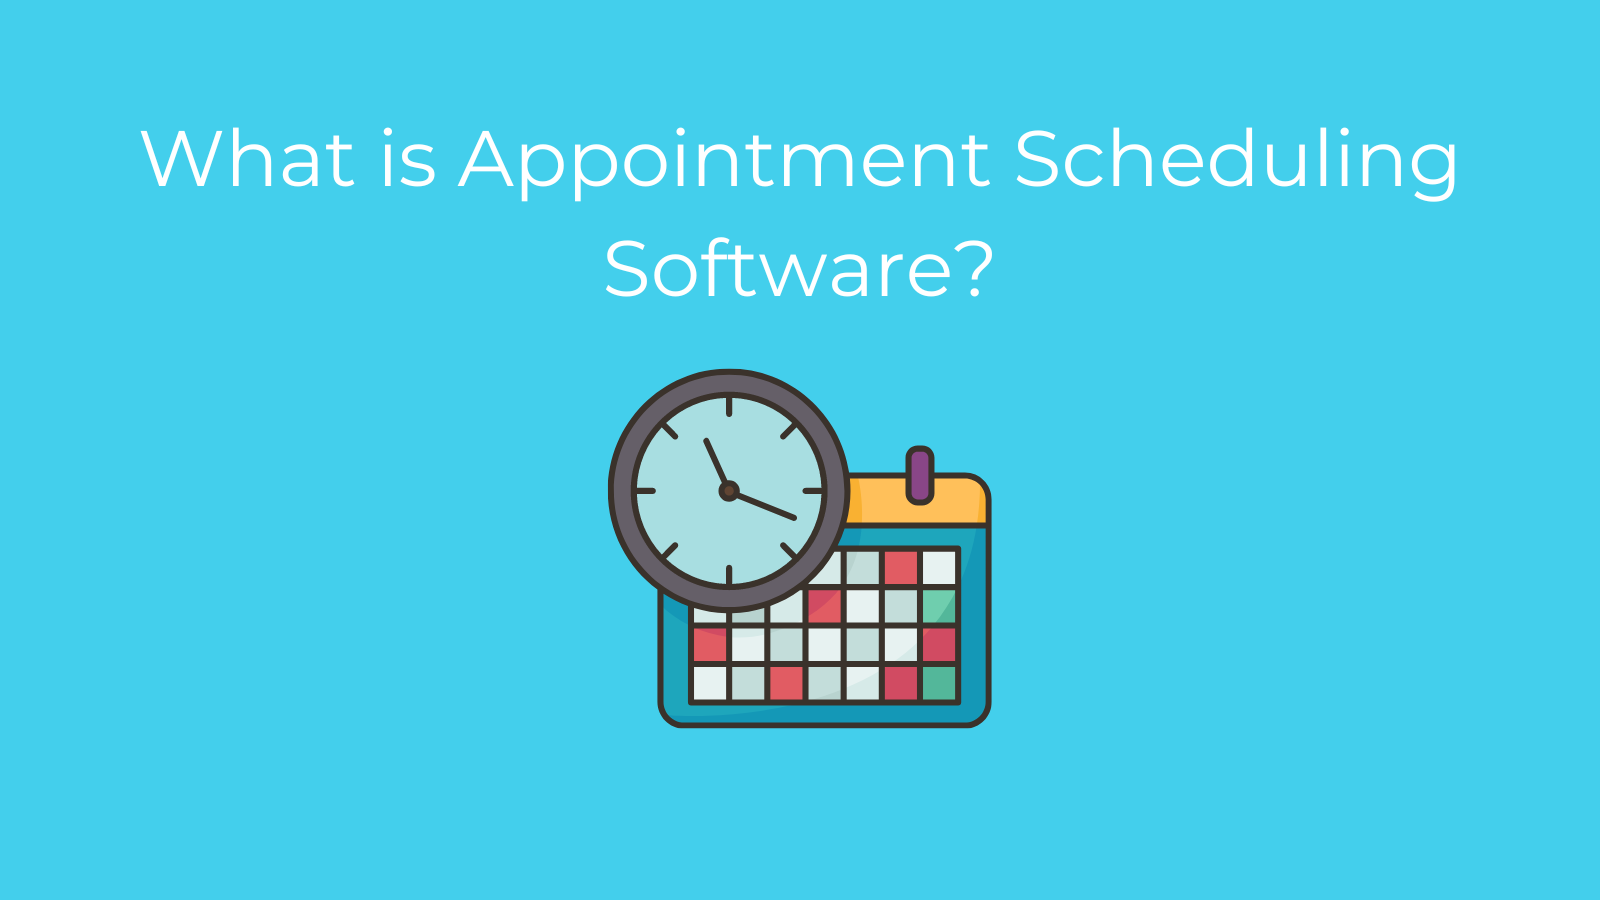 What is Appointment Scheduling Software